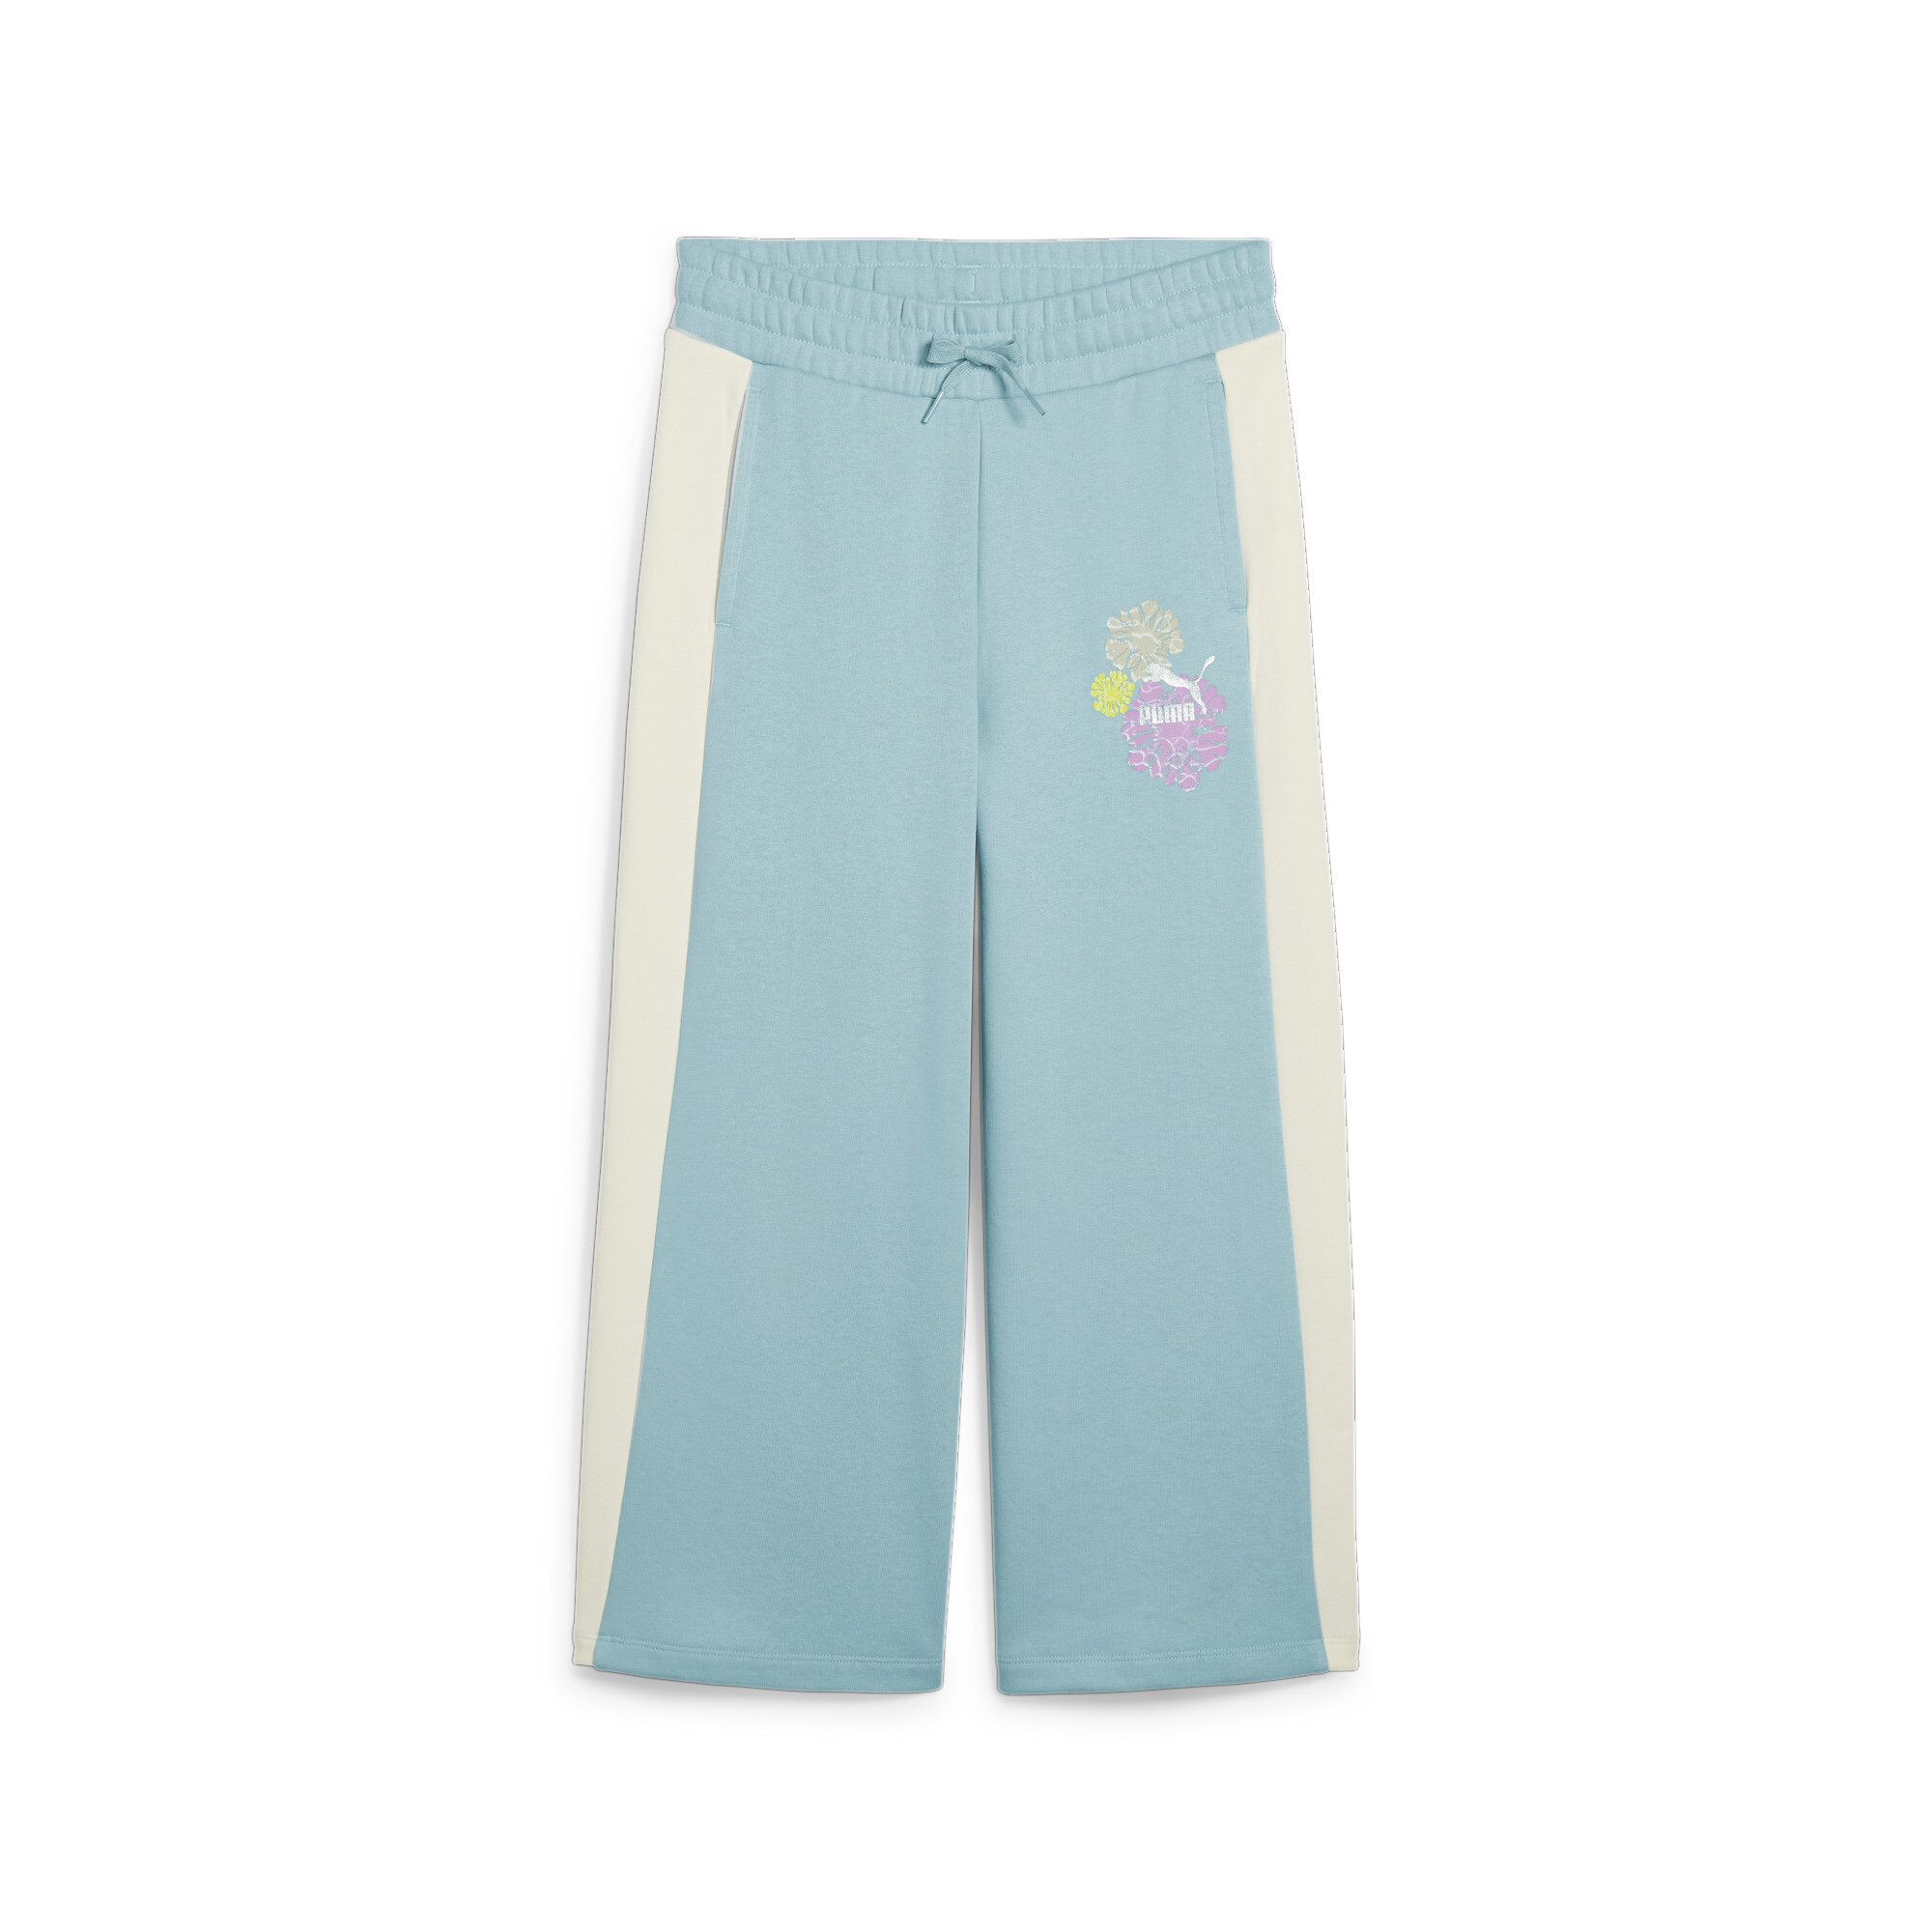 PUMA T7 SNFLR Girls' 7/8 Sweatpants In Blue, Size 11-12 Youth